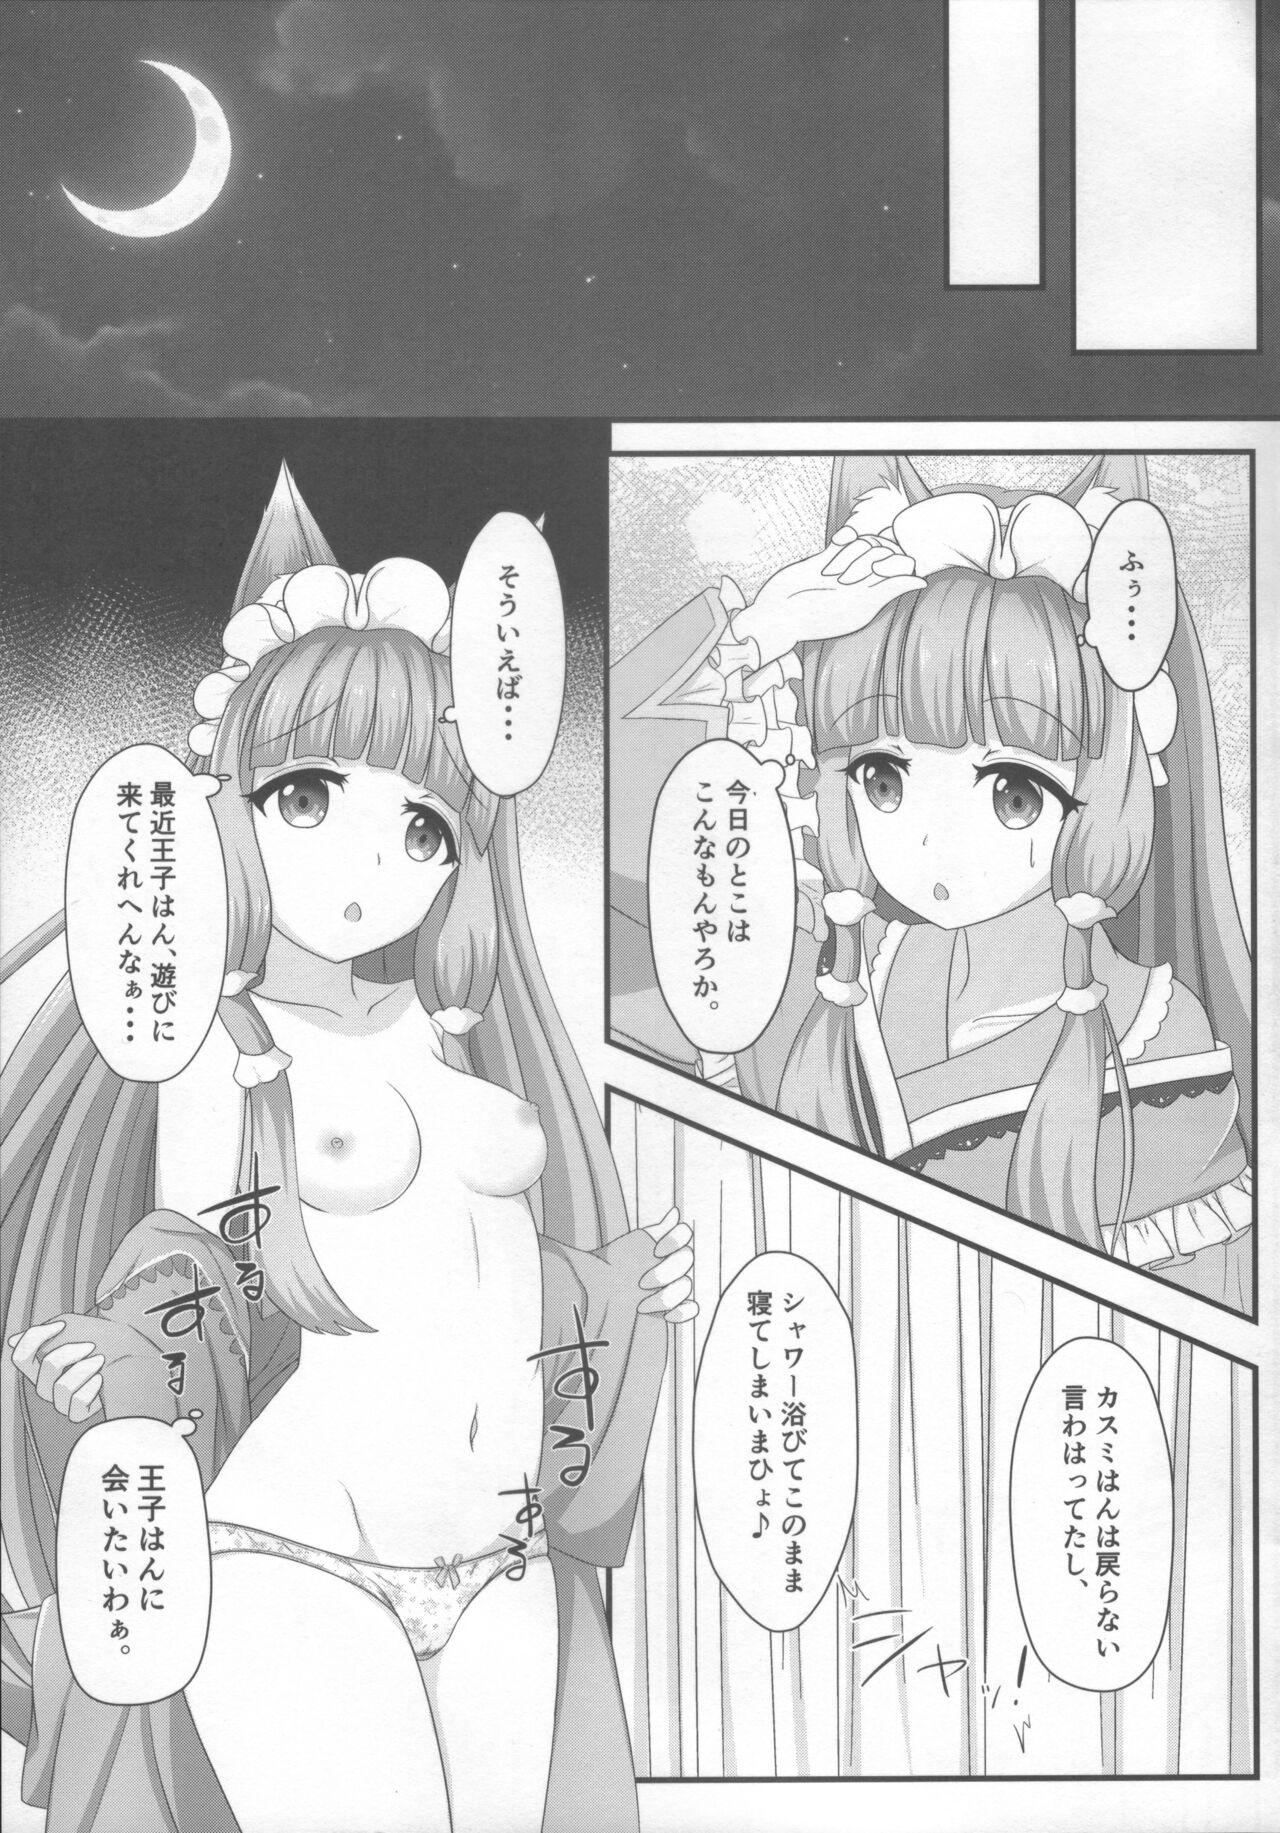 Jacking Off Maho Hime Connect! - Princess connect Public Sex - Page 6